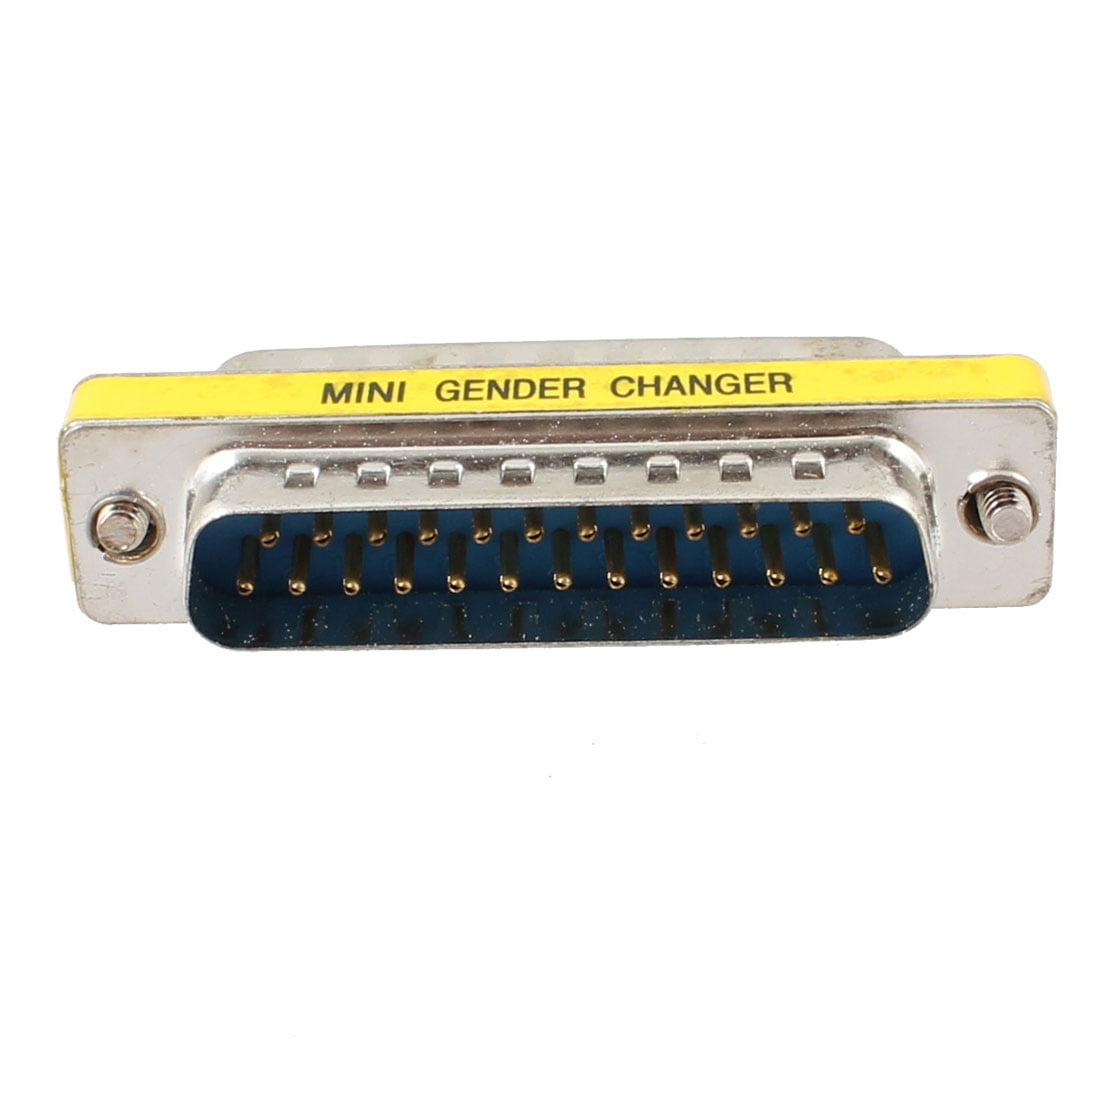 DB25 DB 25 pin D Sub Male to Male Gender Changer Coupler Adapter Converter 